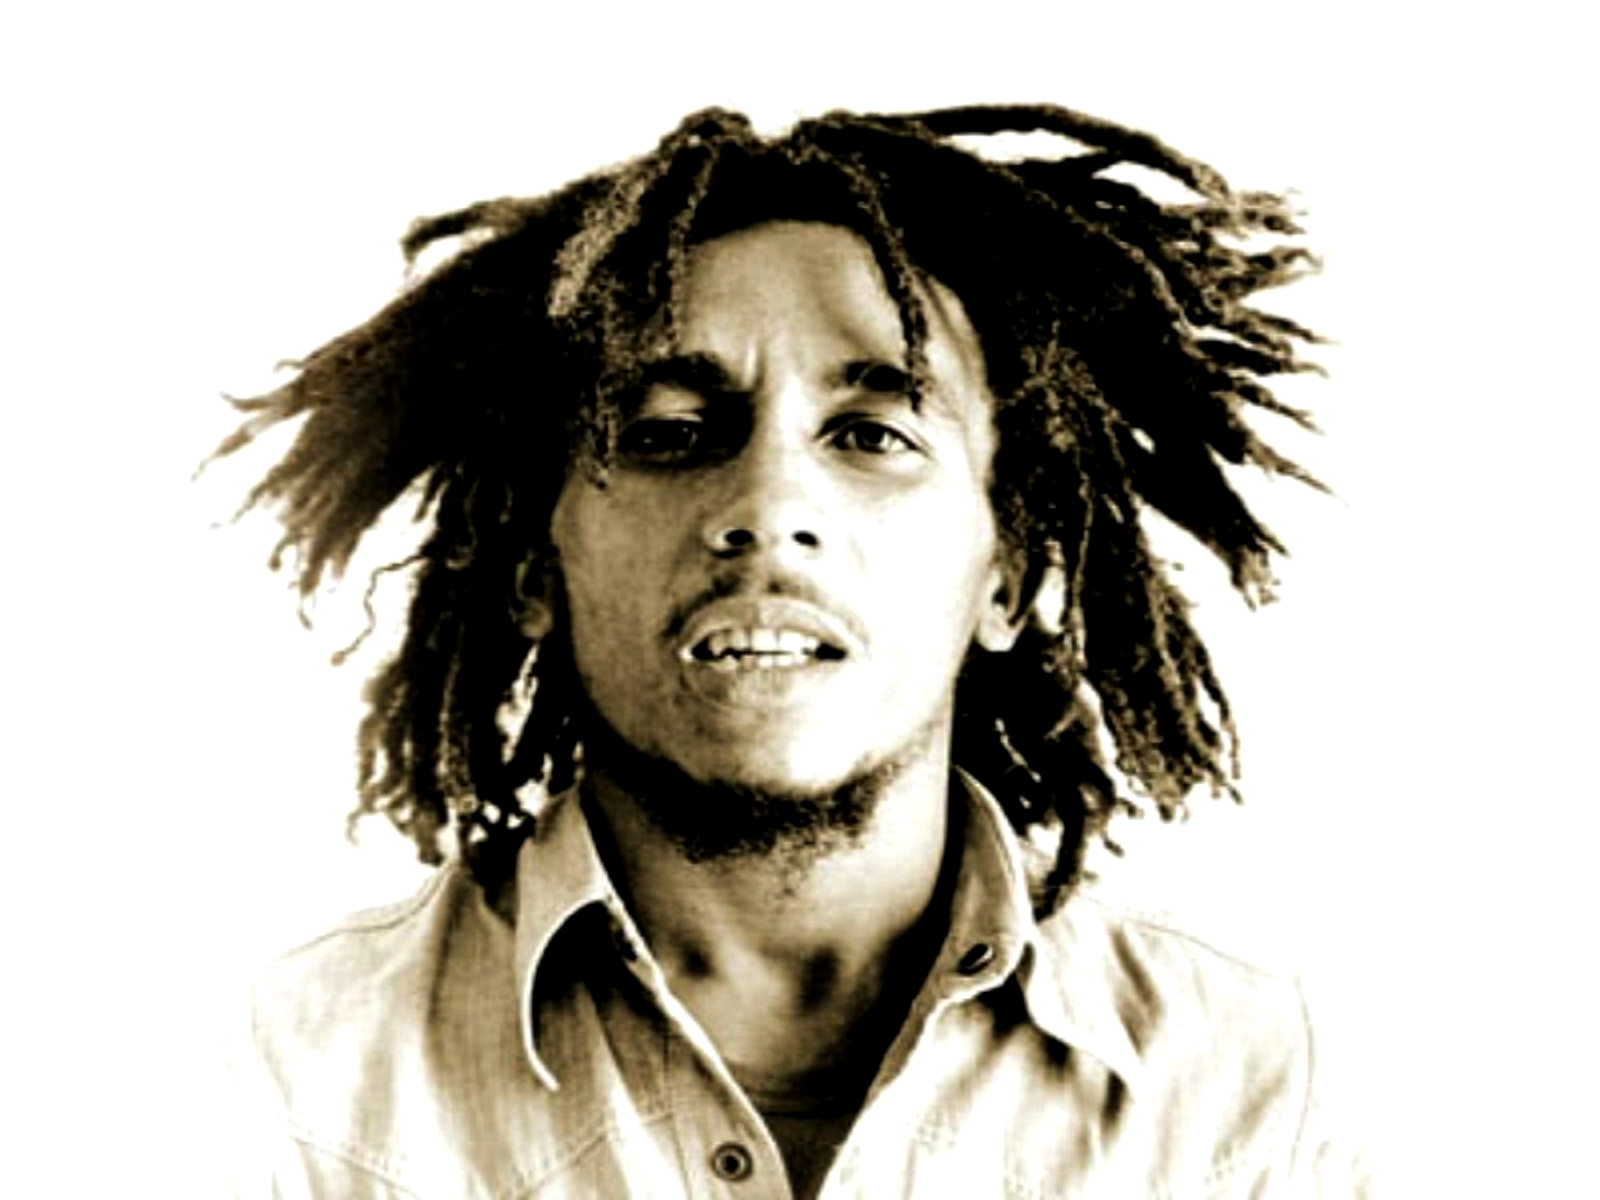 Central Wallpaper: Awesome Bob Marley Photos HD Wallpapers